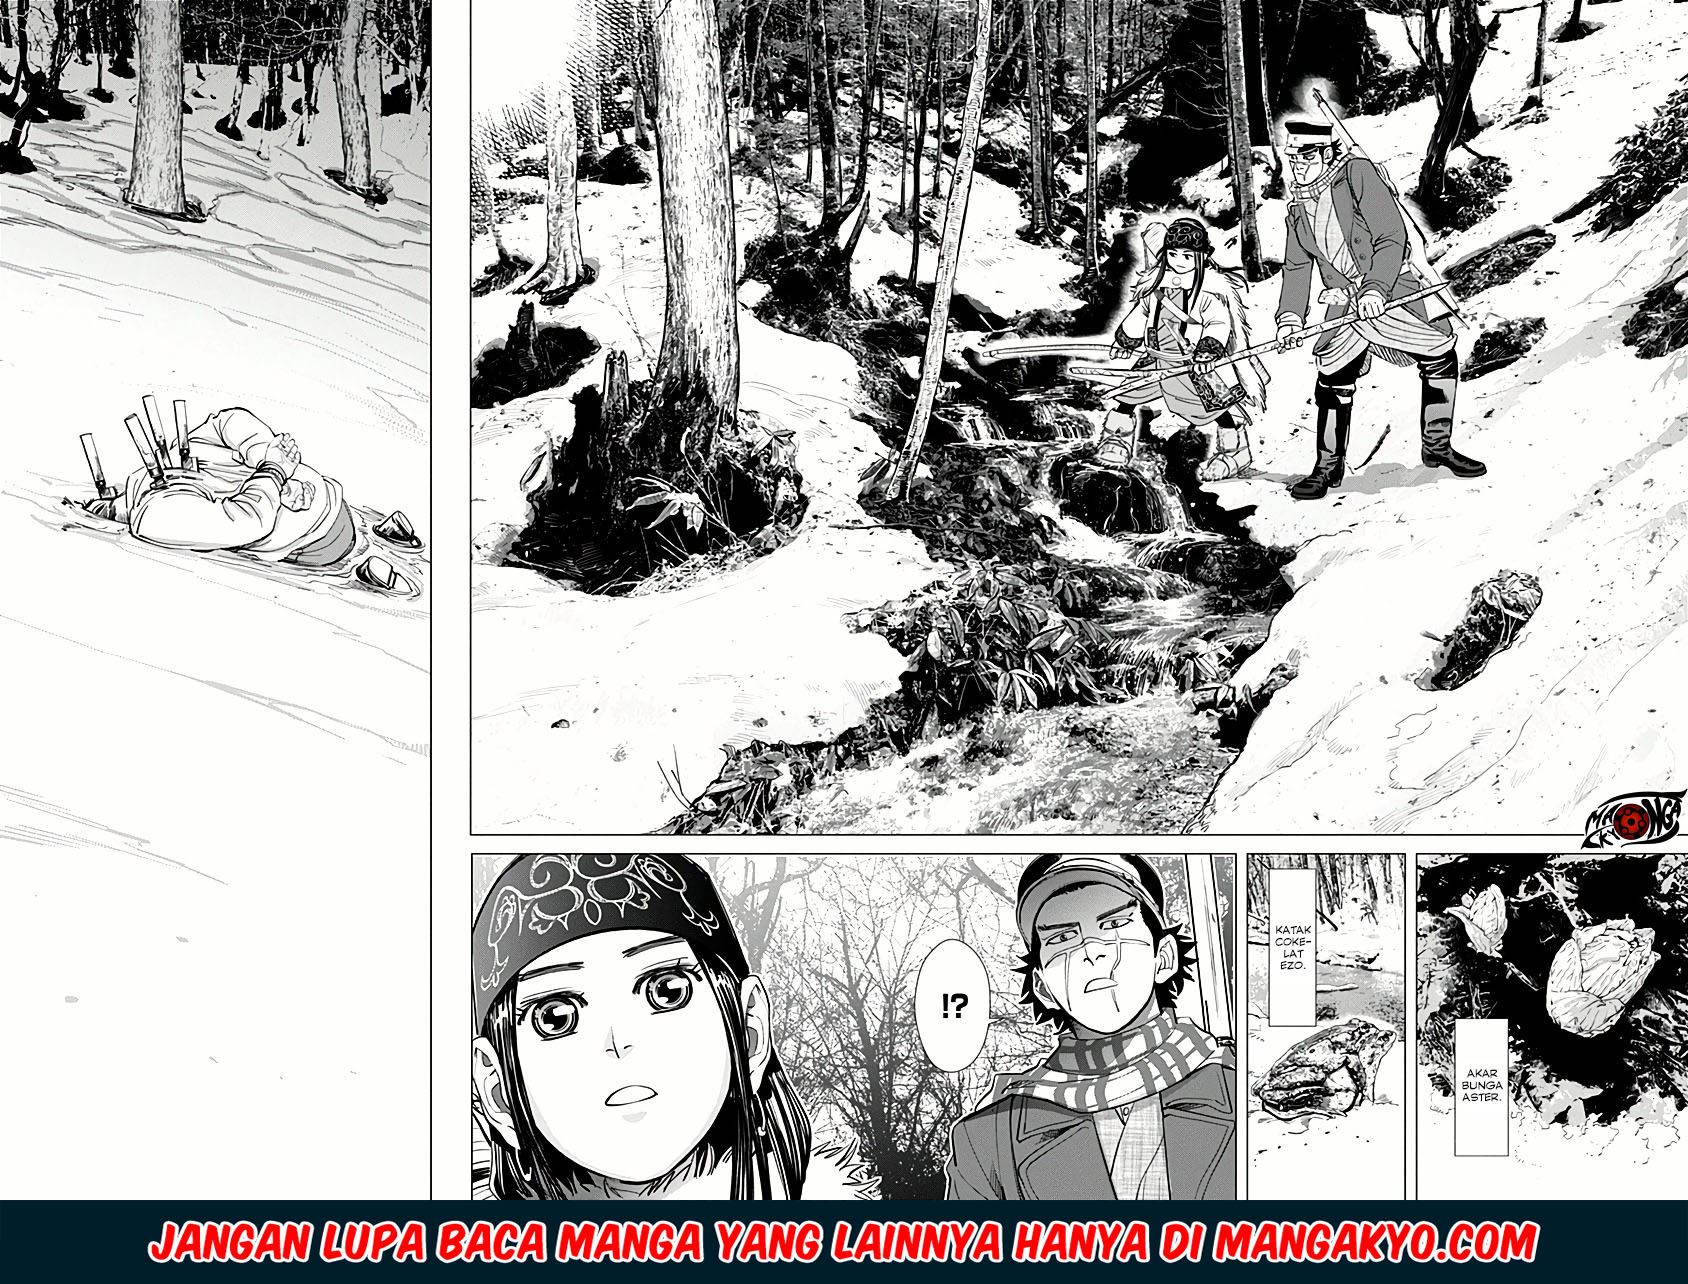 Golden Kamuy Chapter 37